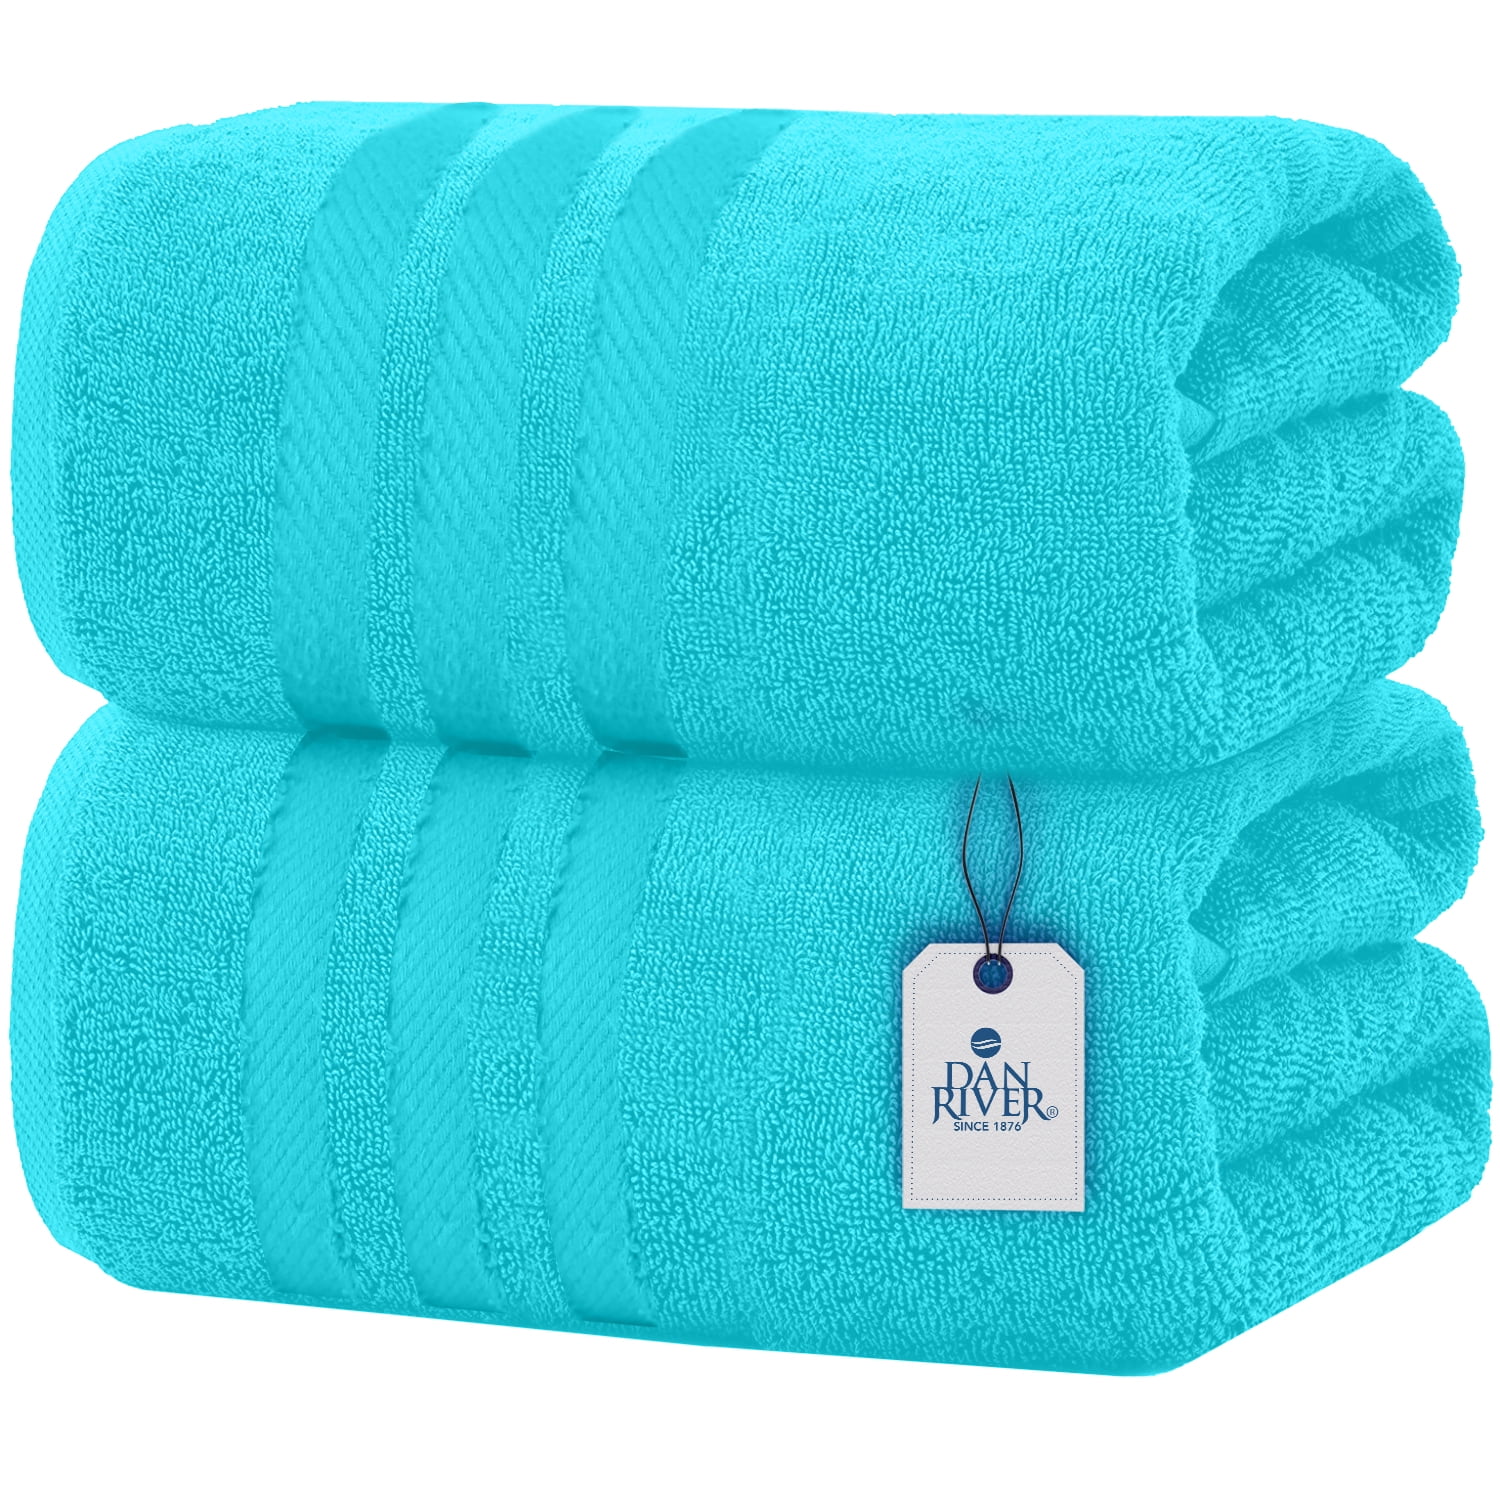  DAN RIVER 100% Cotton Luxury Oversized Bath Towel 40”x80”  Clearance Pack of 1 – 600 GSM Highly Absorbent & Quick Dry Extra-Large Bath  Sheet for Bathroom, Hotel, Spa, Beach, Pool, Gym